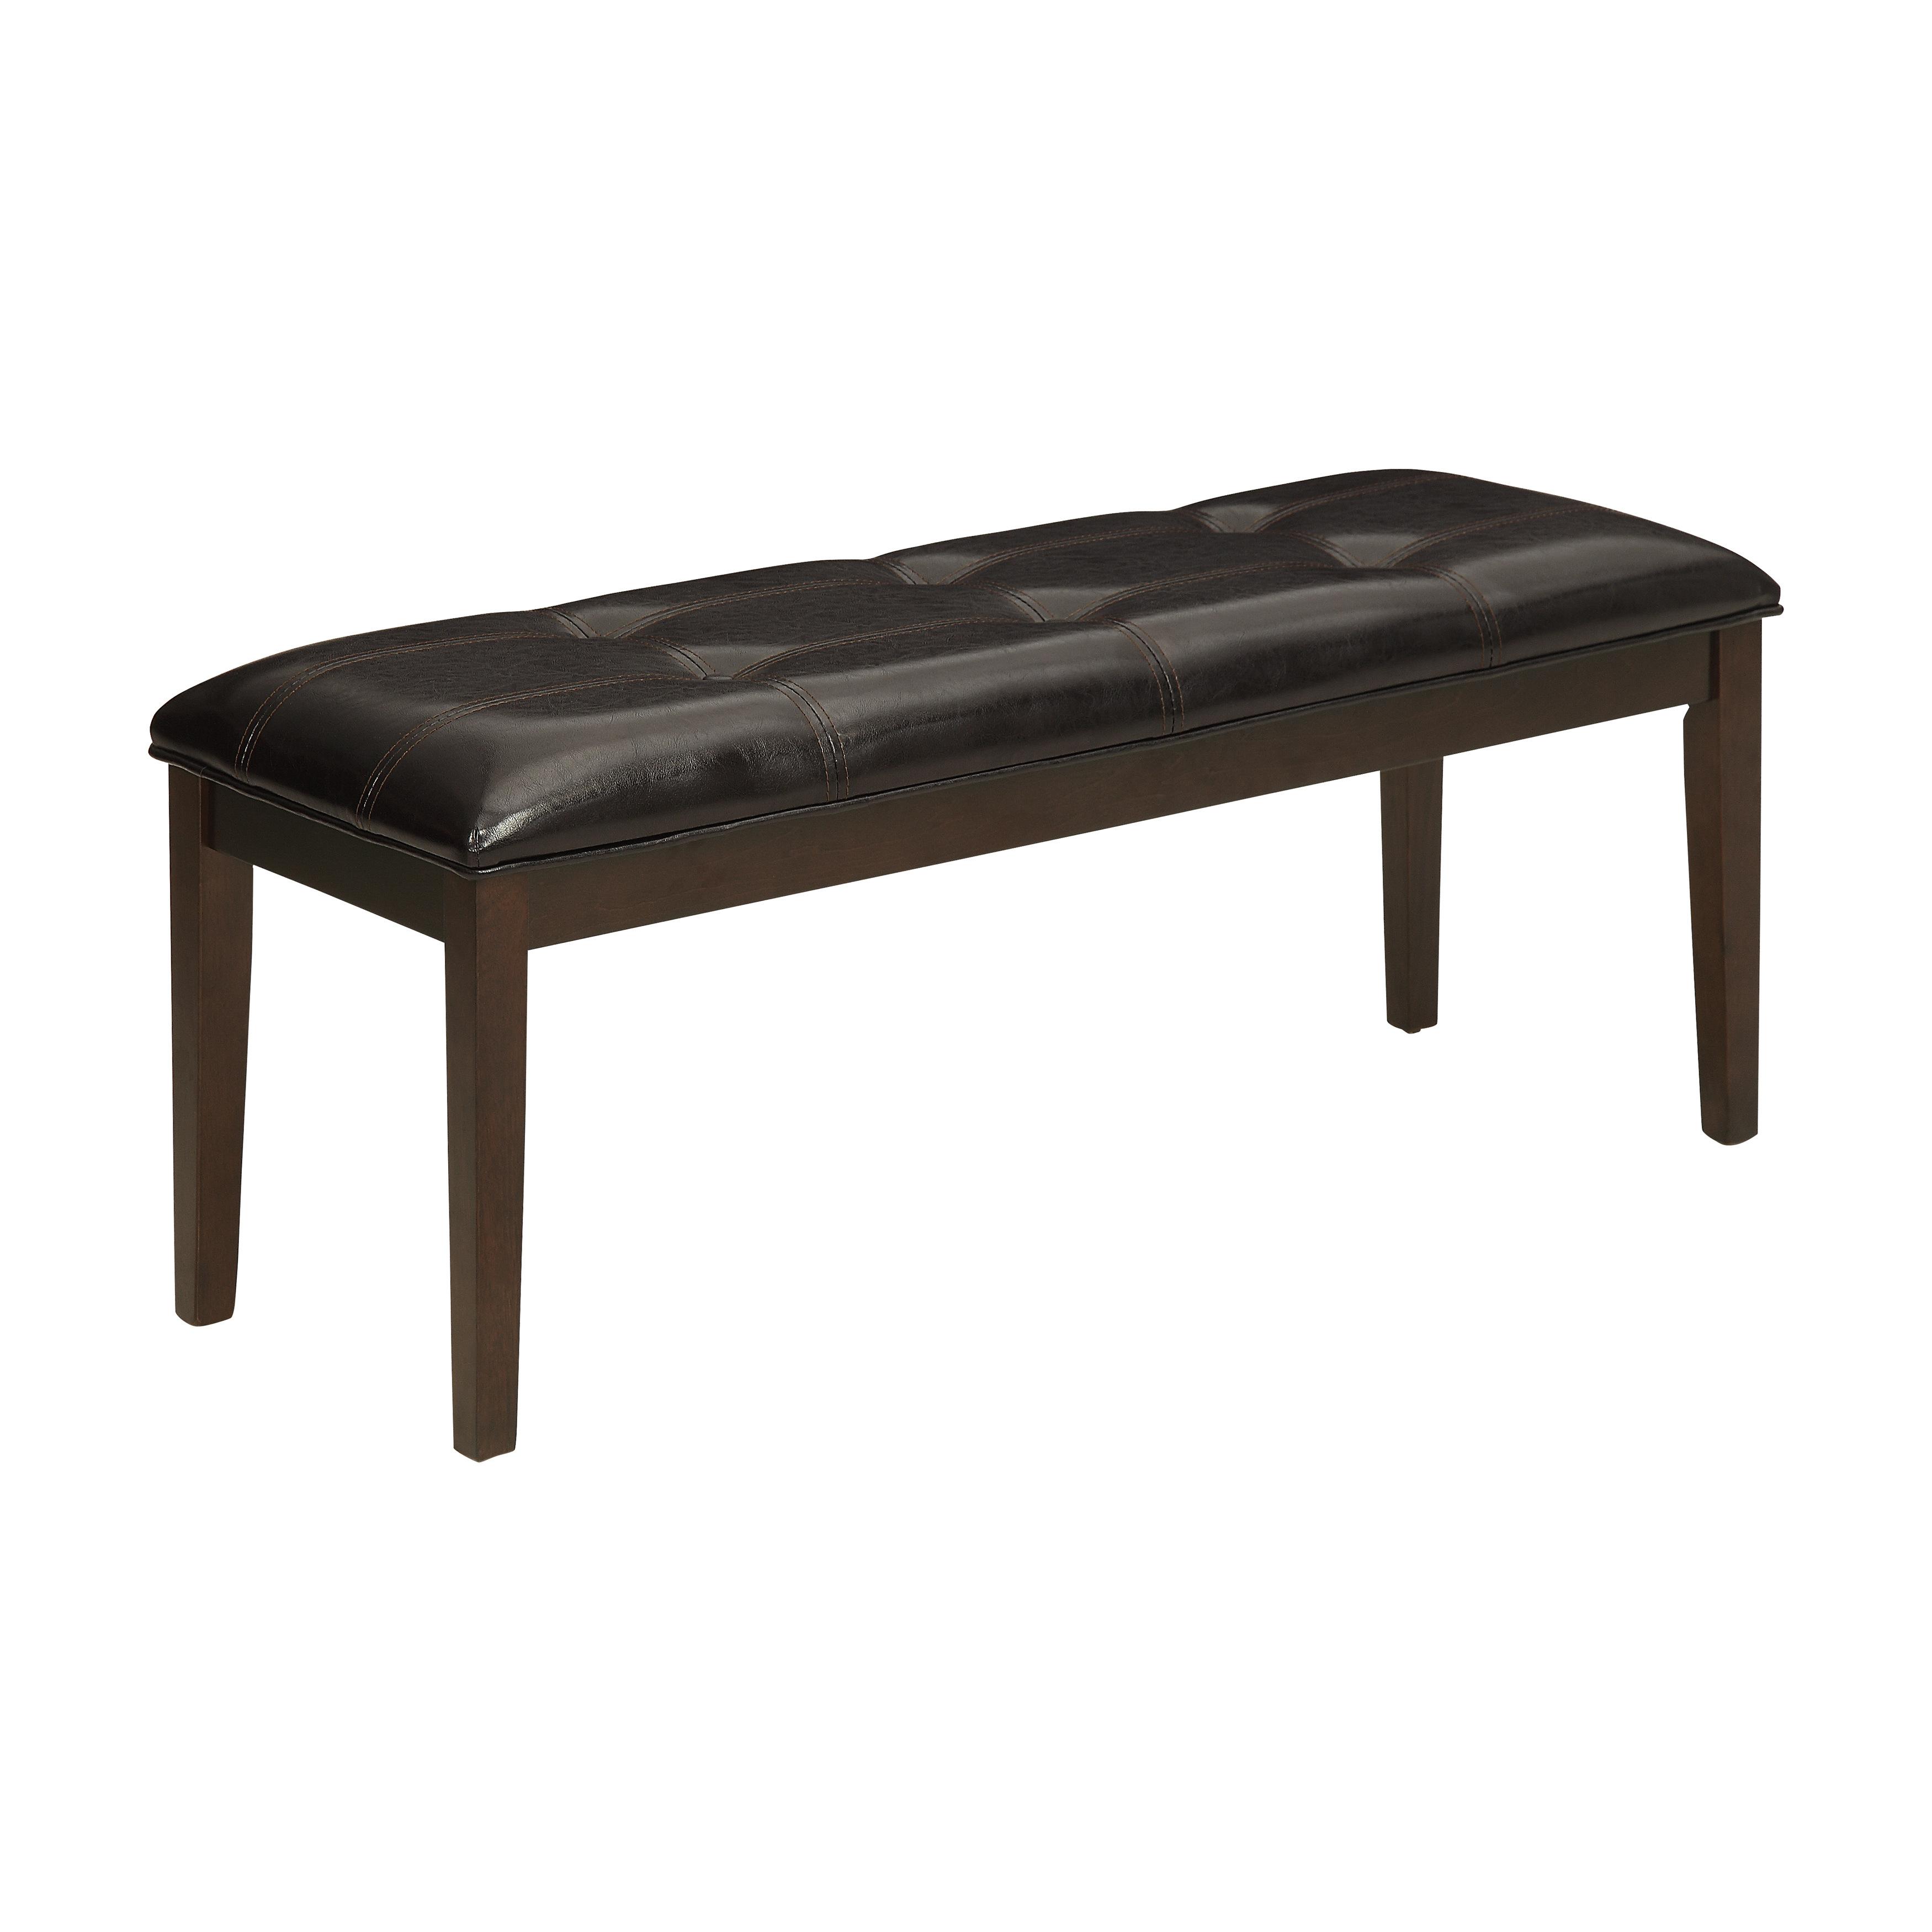 Transitional Dining Bench 2456-13 Decatur 2456-13 in Espresso Faux Leather